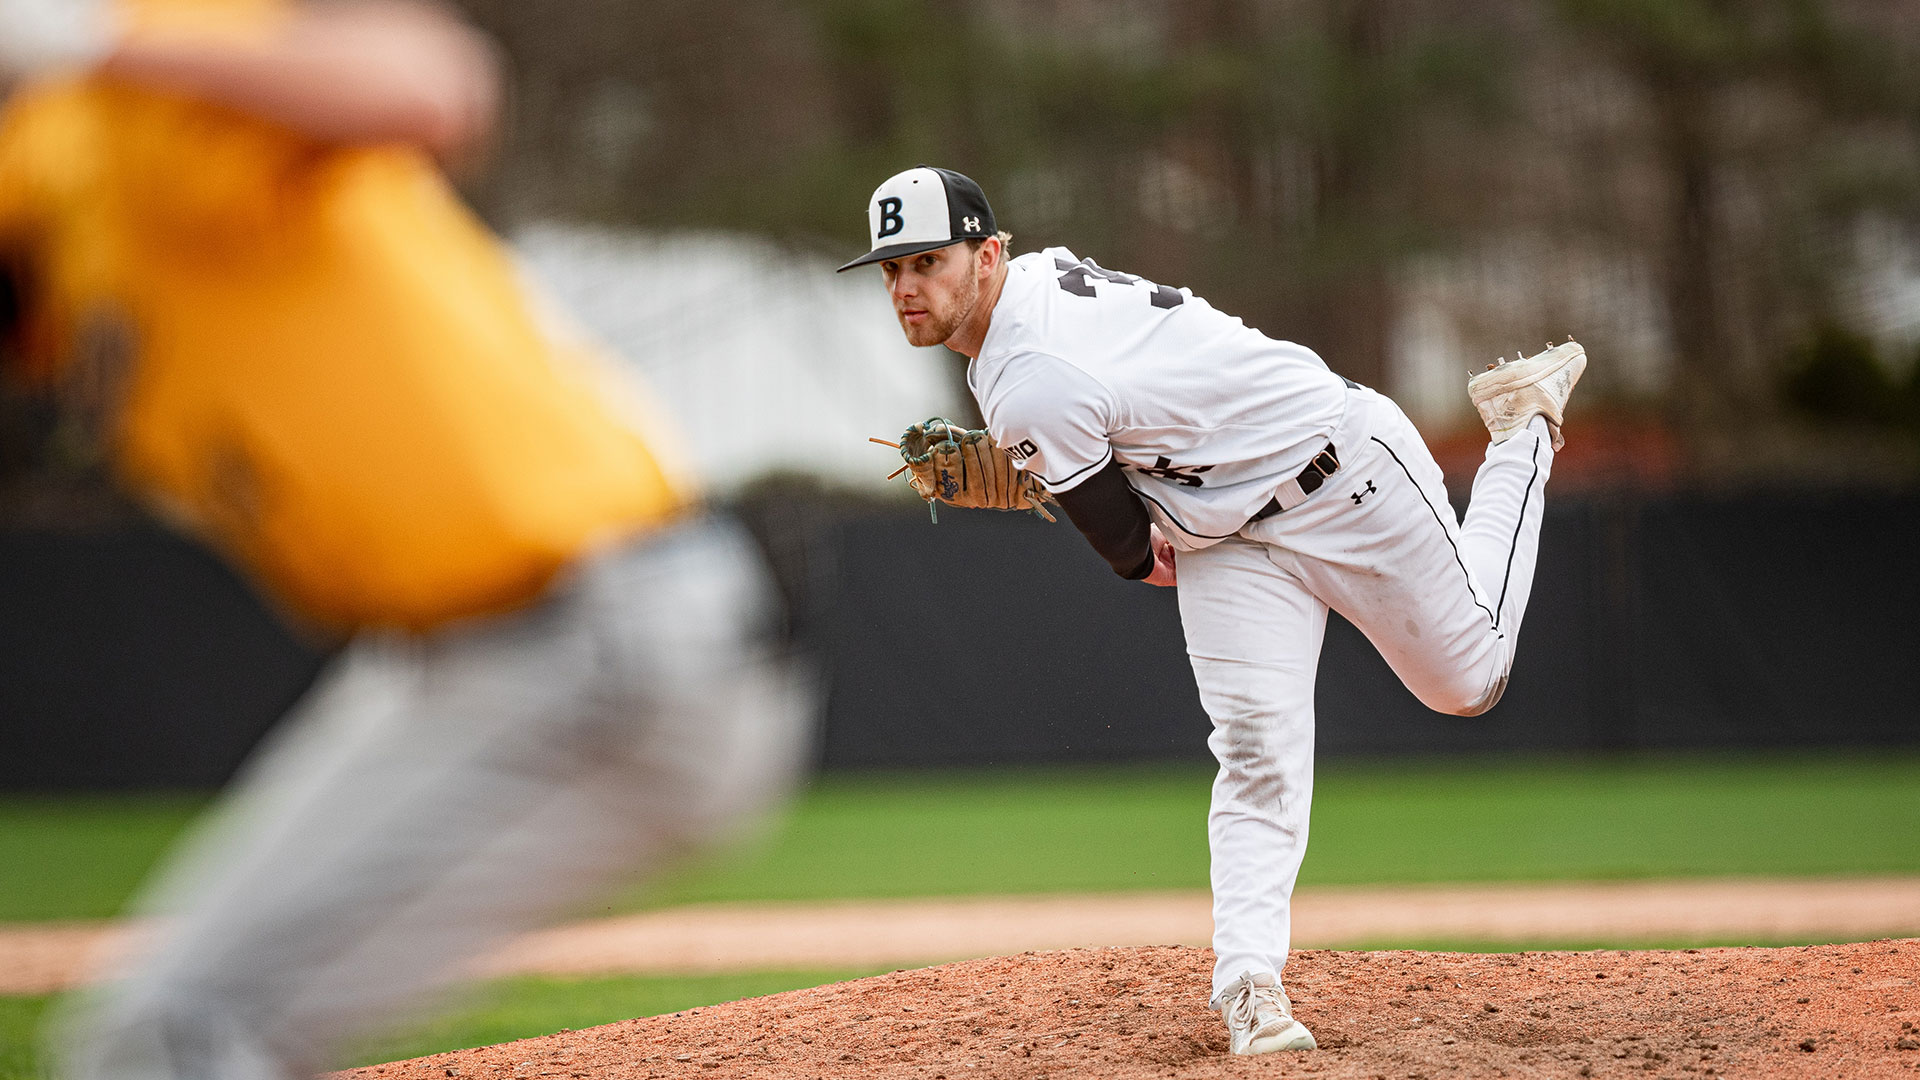 Heber earns complete-game victory at Southern Connecticut